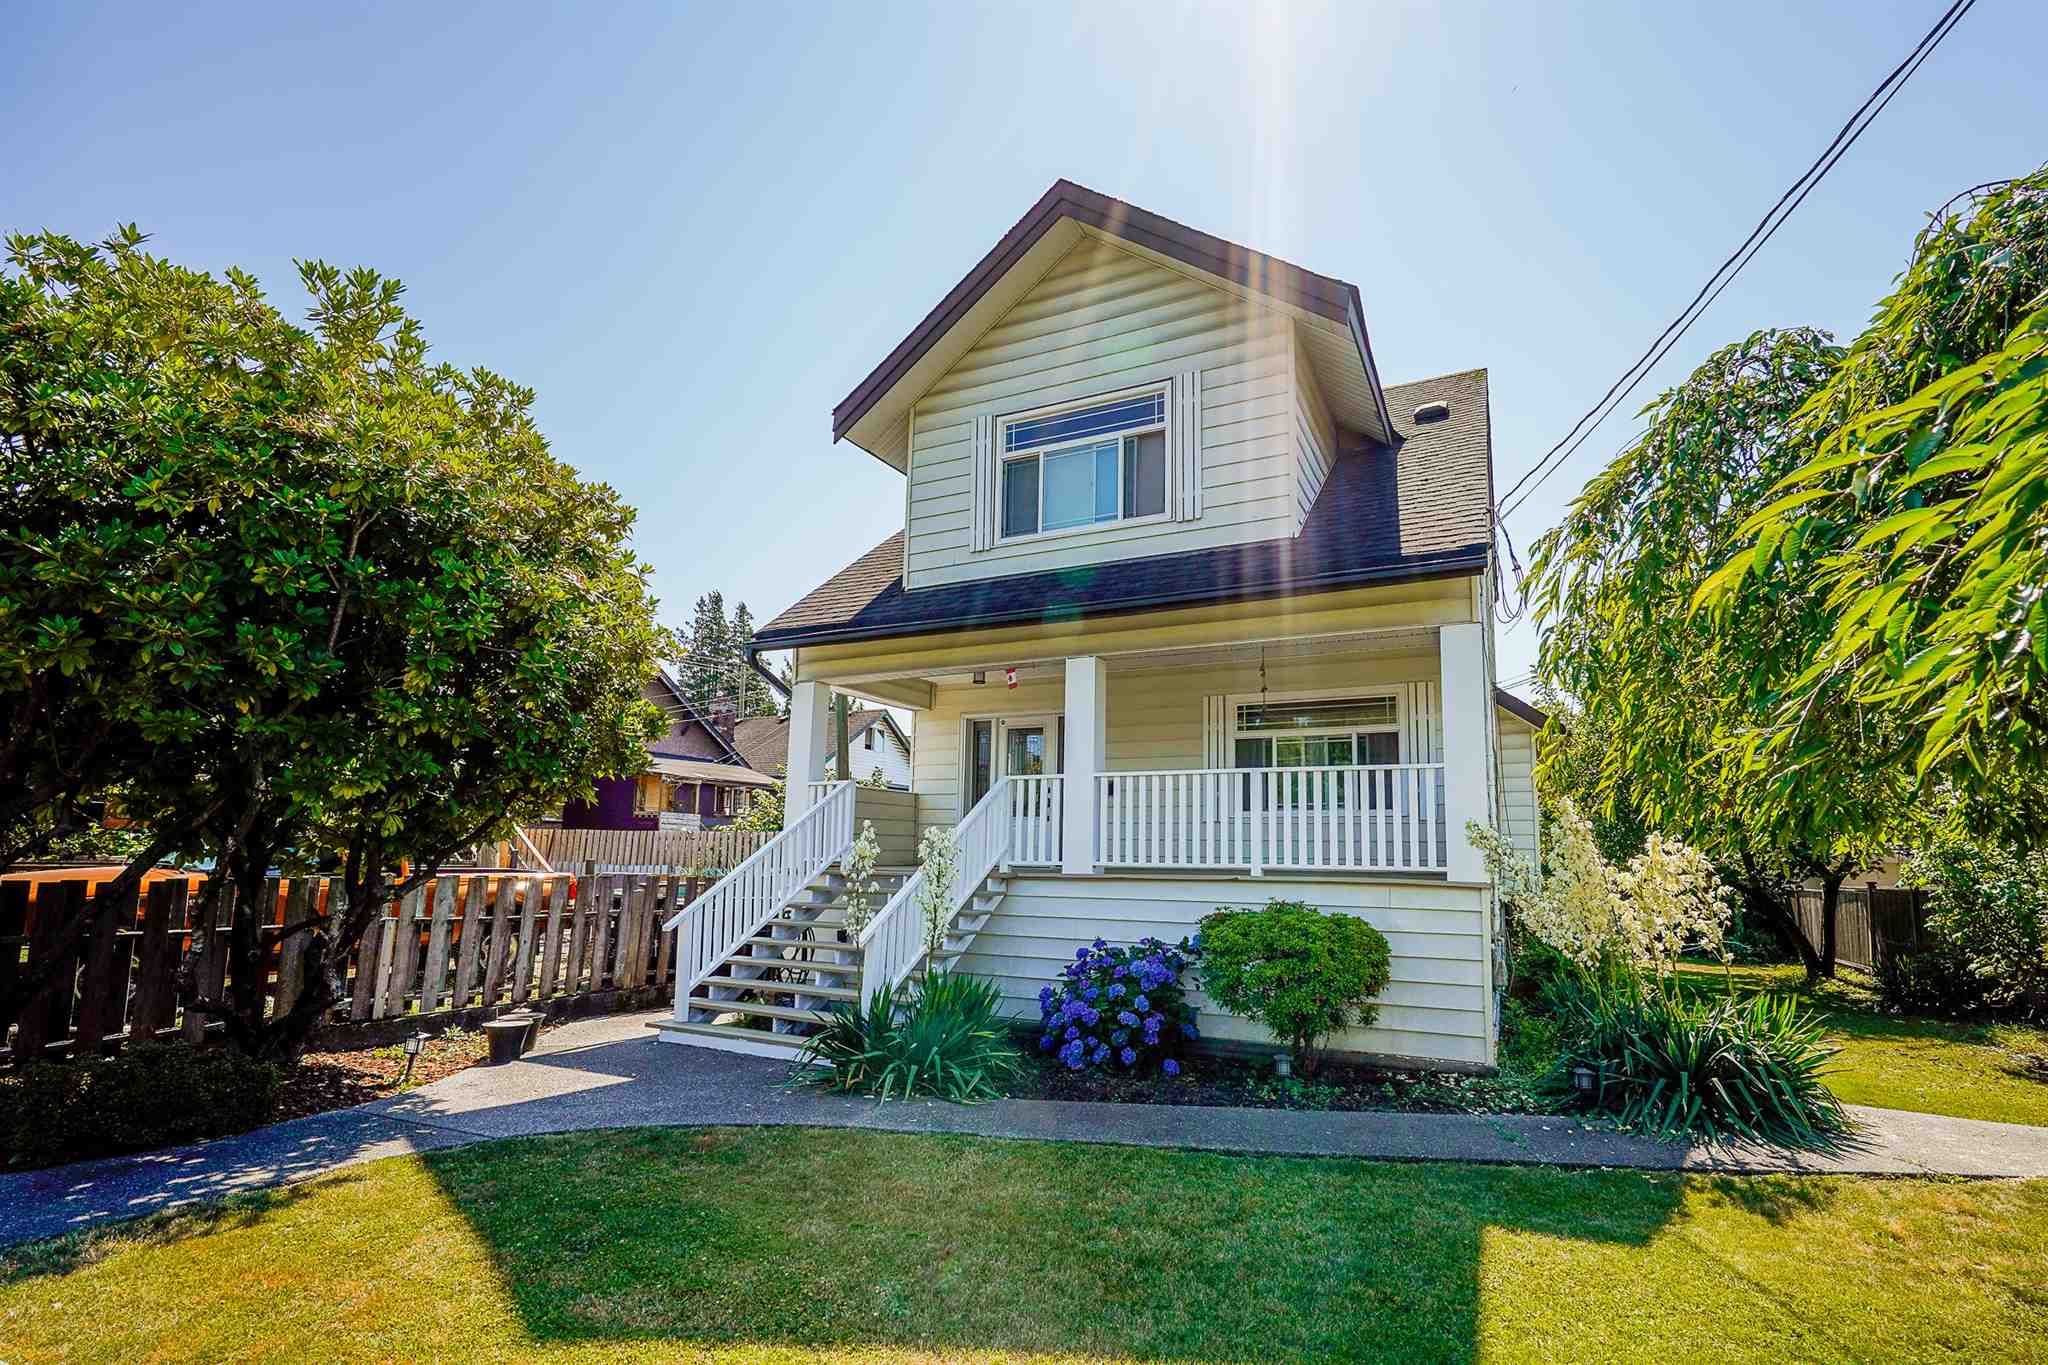 Main Photo: 1004 DUBLIN STREET in New Westminster: Moody Park House for sale : MLS®# R2601230